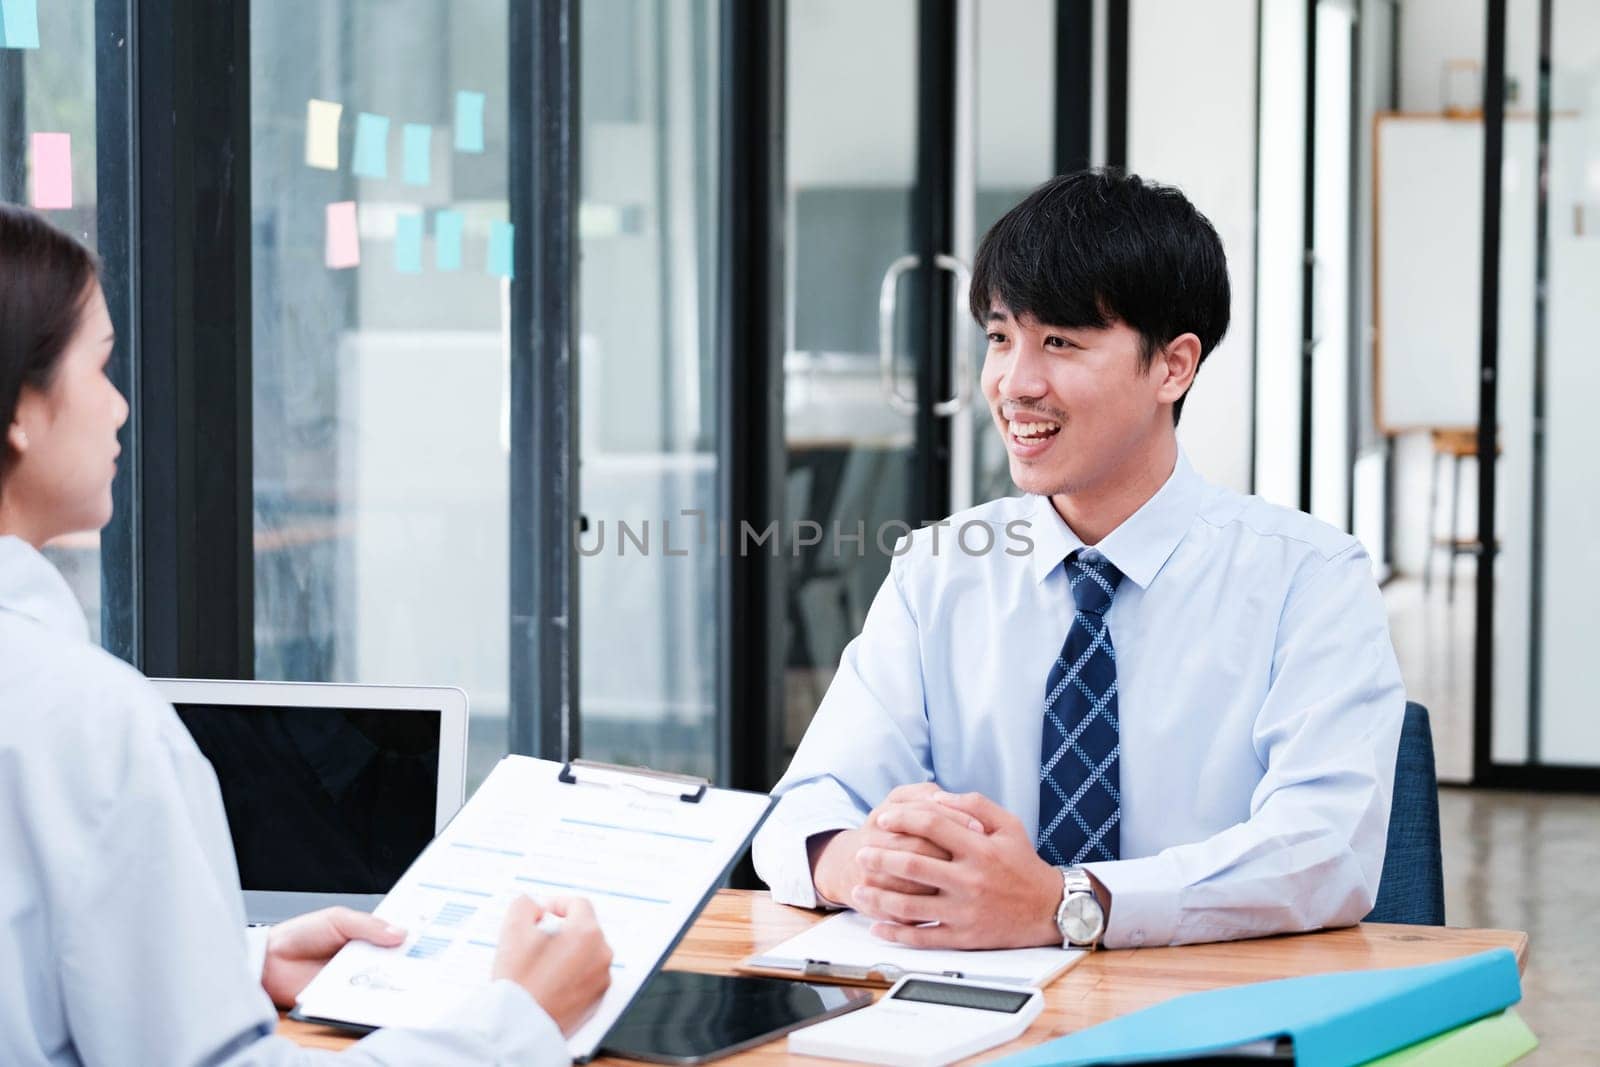 A candidate engaged in a job interview with a hiring manager, discussing qualifications and employment opportunities.